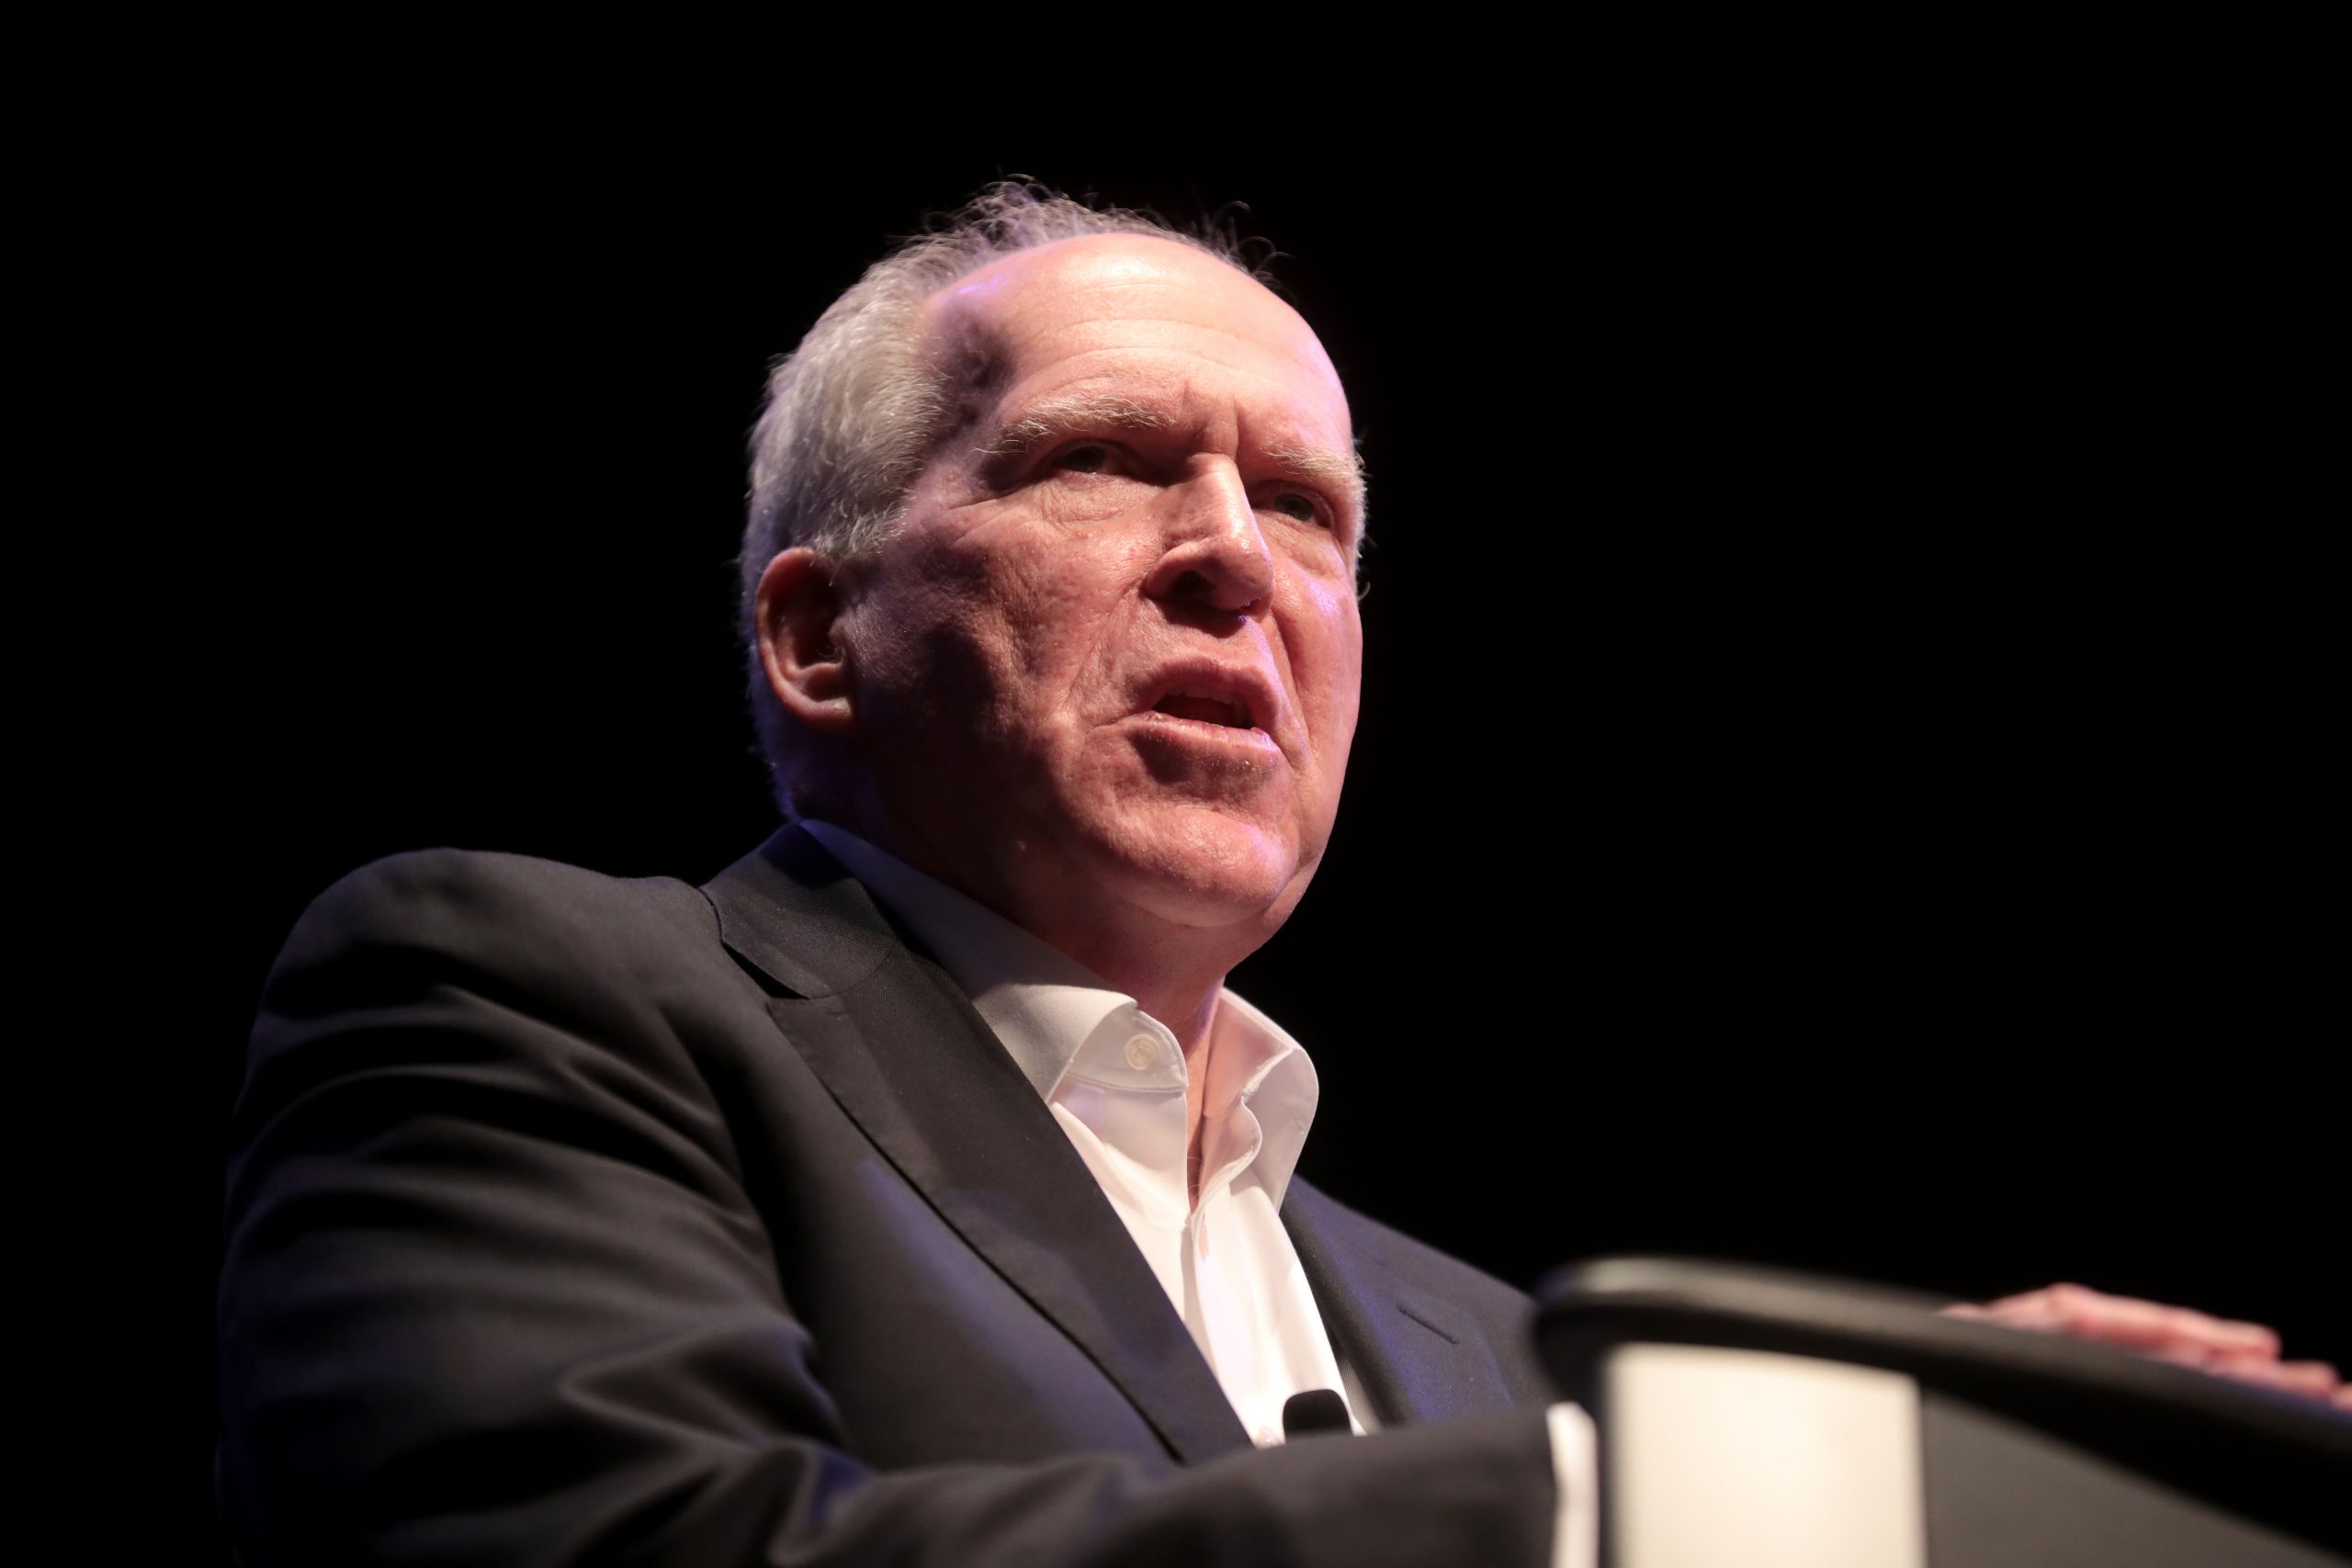 Spotlight On Brennan: Durham Requests To Interview Former CIA Director